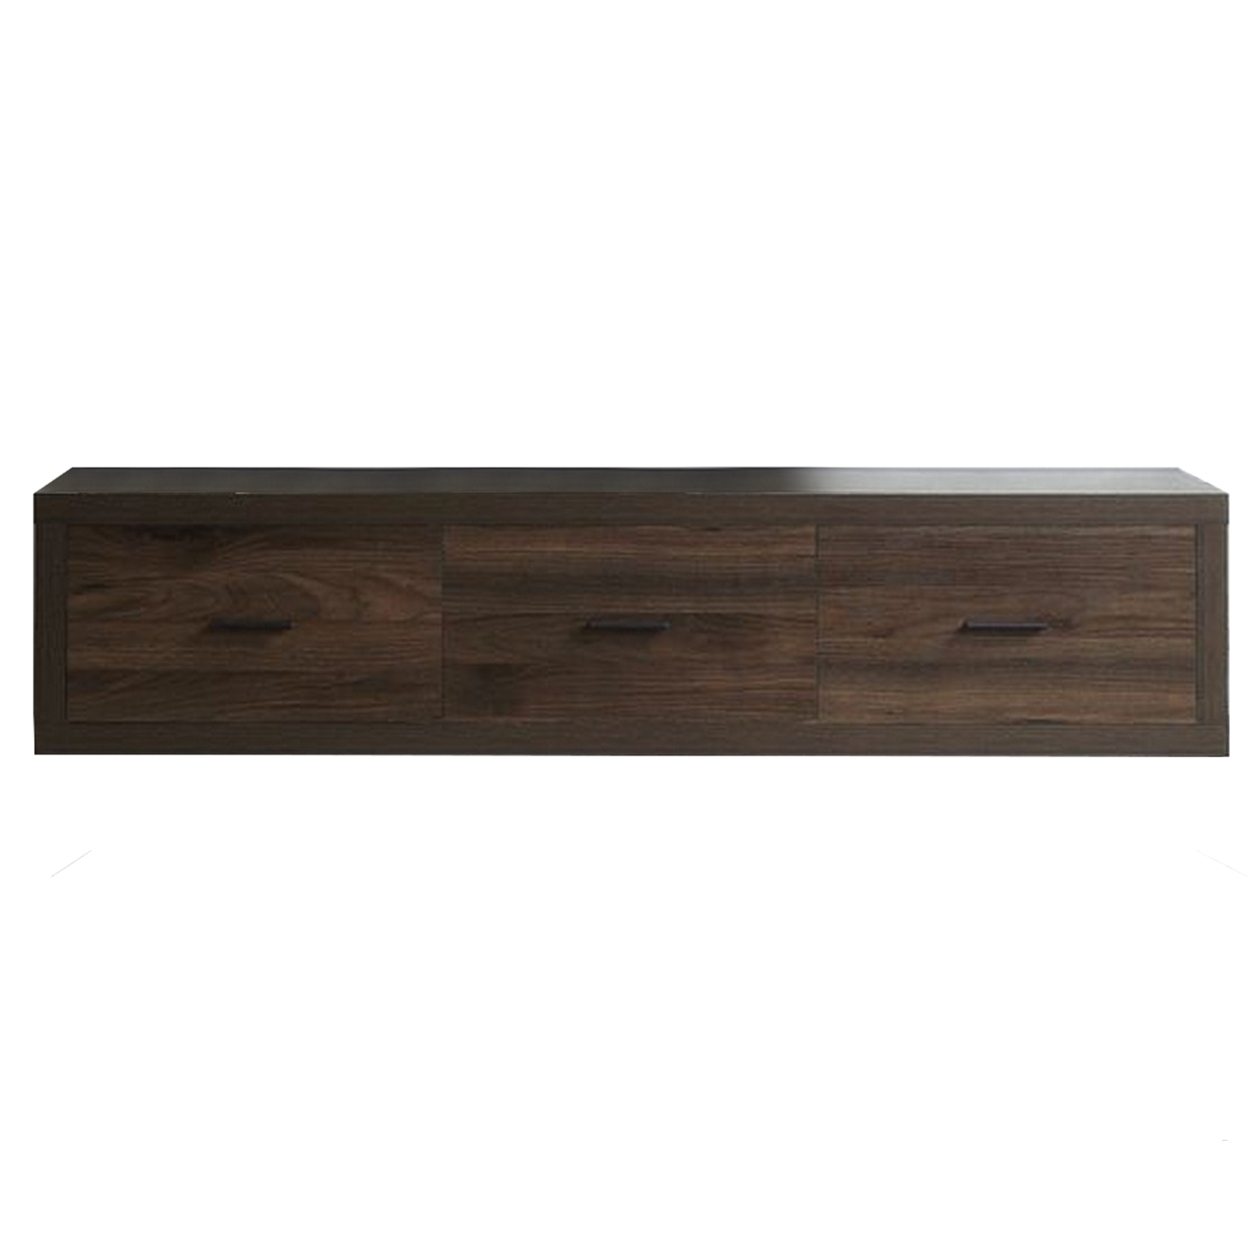 TV Stand With 3 Drawers And Grain Details, Brown- Saltoro Sherpi